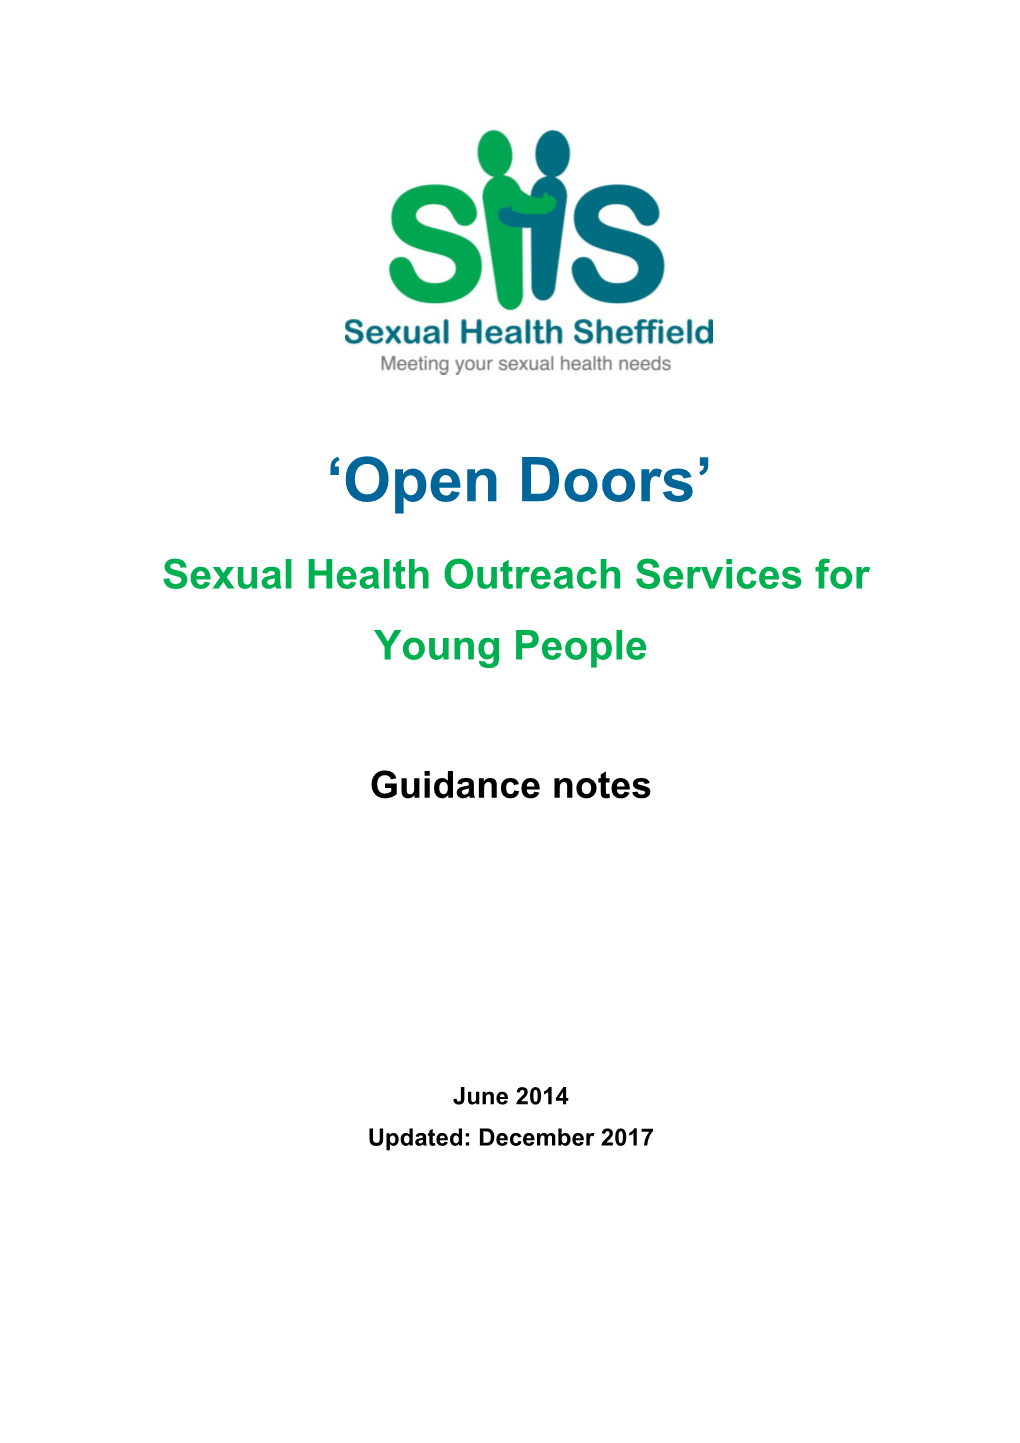 Sexual Health Outreach Services for Young People